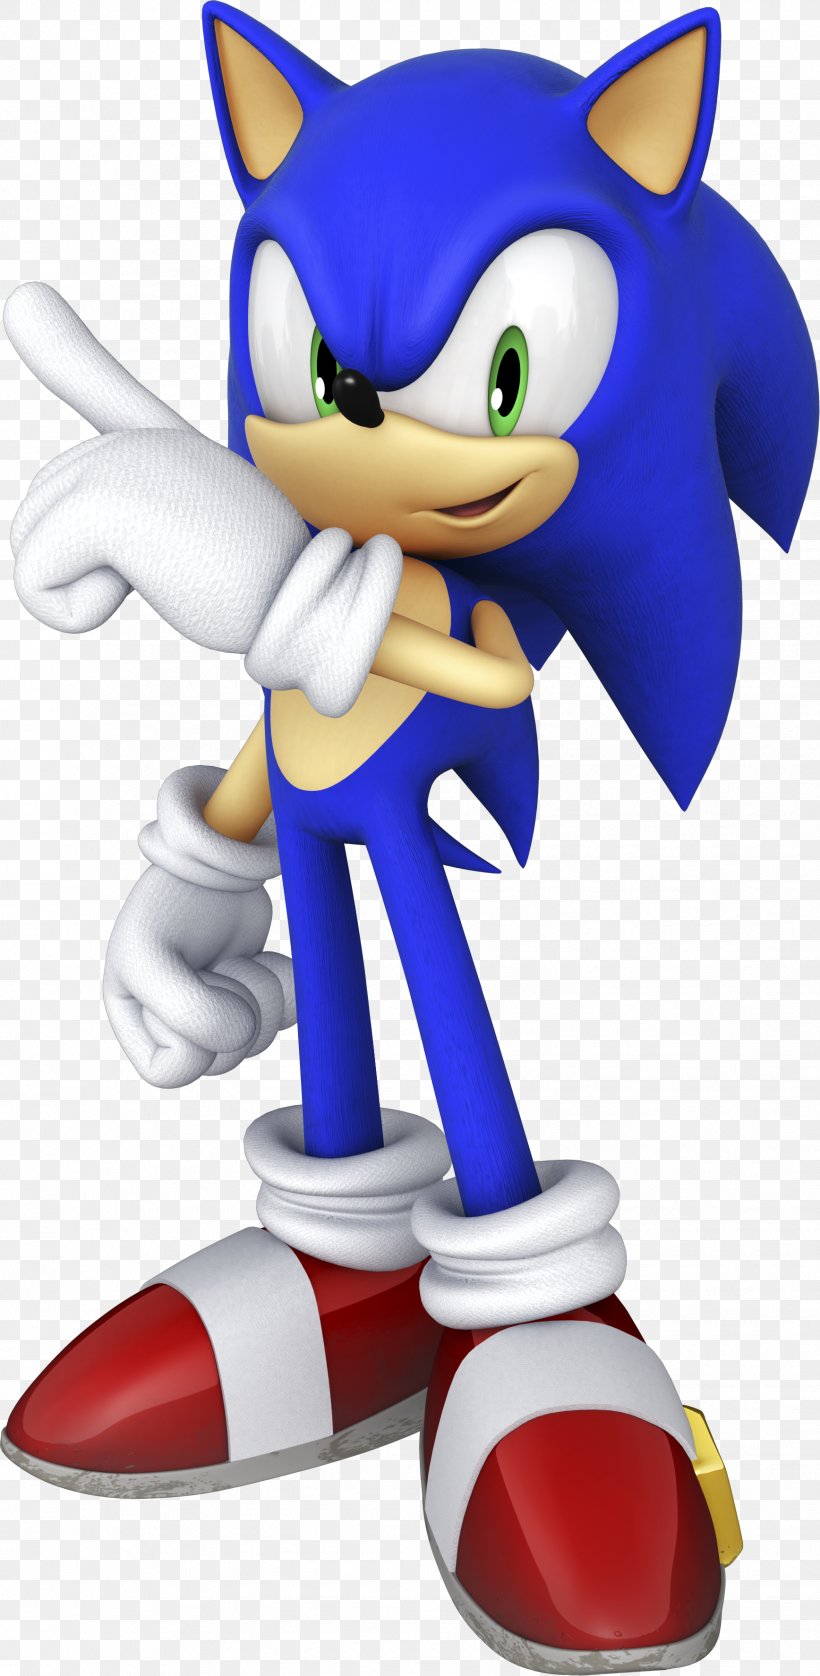 Sonic The Hedgehog 2 Sonic The Hedgehog 3 Sonic & Sega All-Stars Racing Sonic & All-Stars Racing Transformed, PNG, 1736x3549px, Sonic The Hedgehog, Action Figure, Cartoon, Concept Art, Fictional Character Download Free